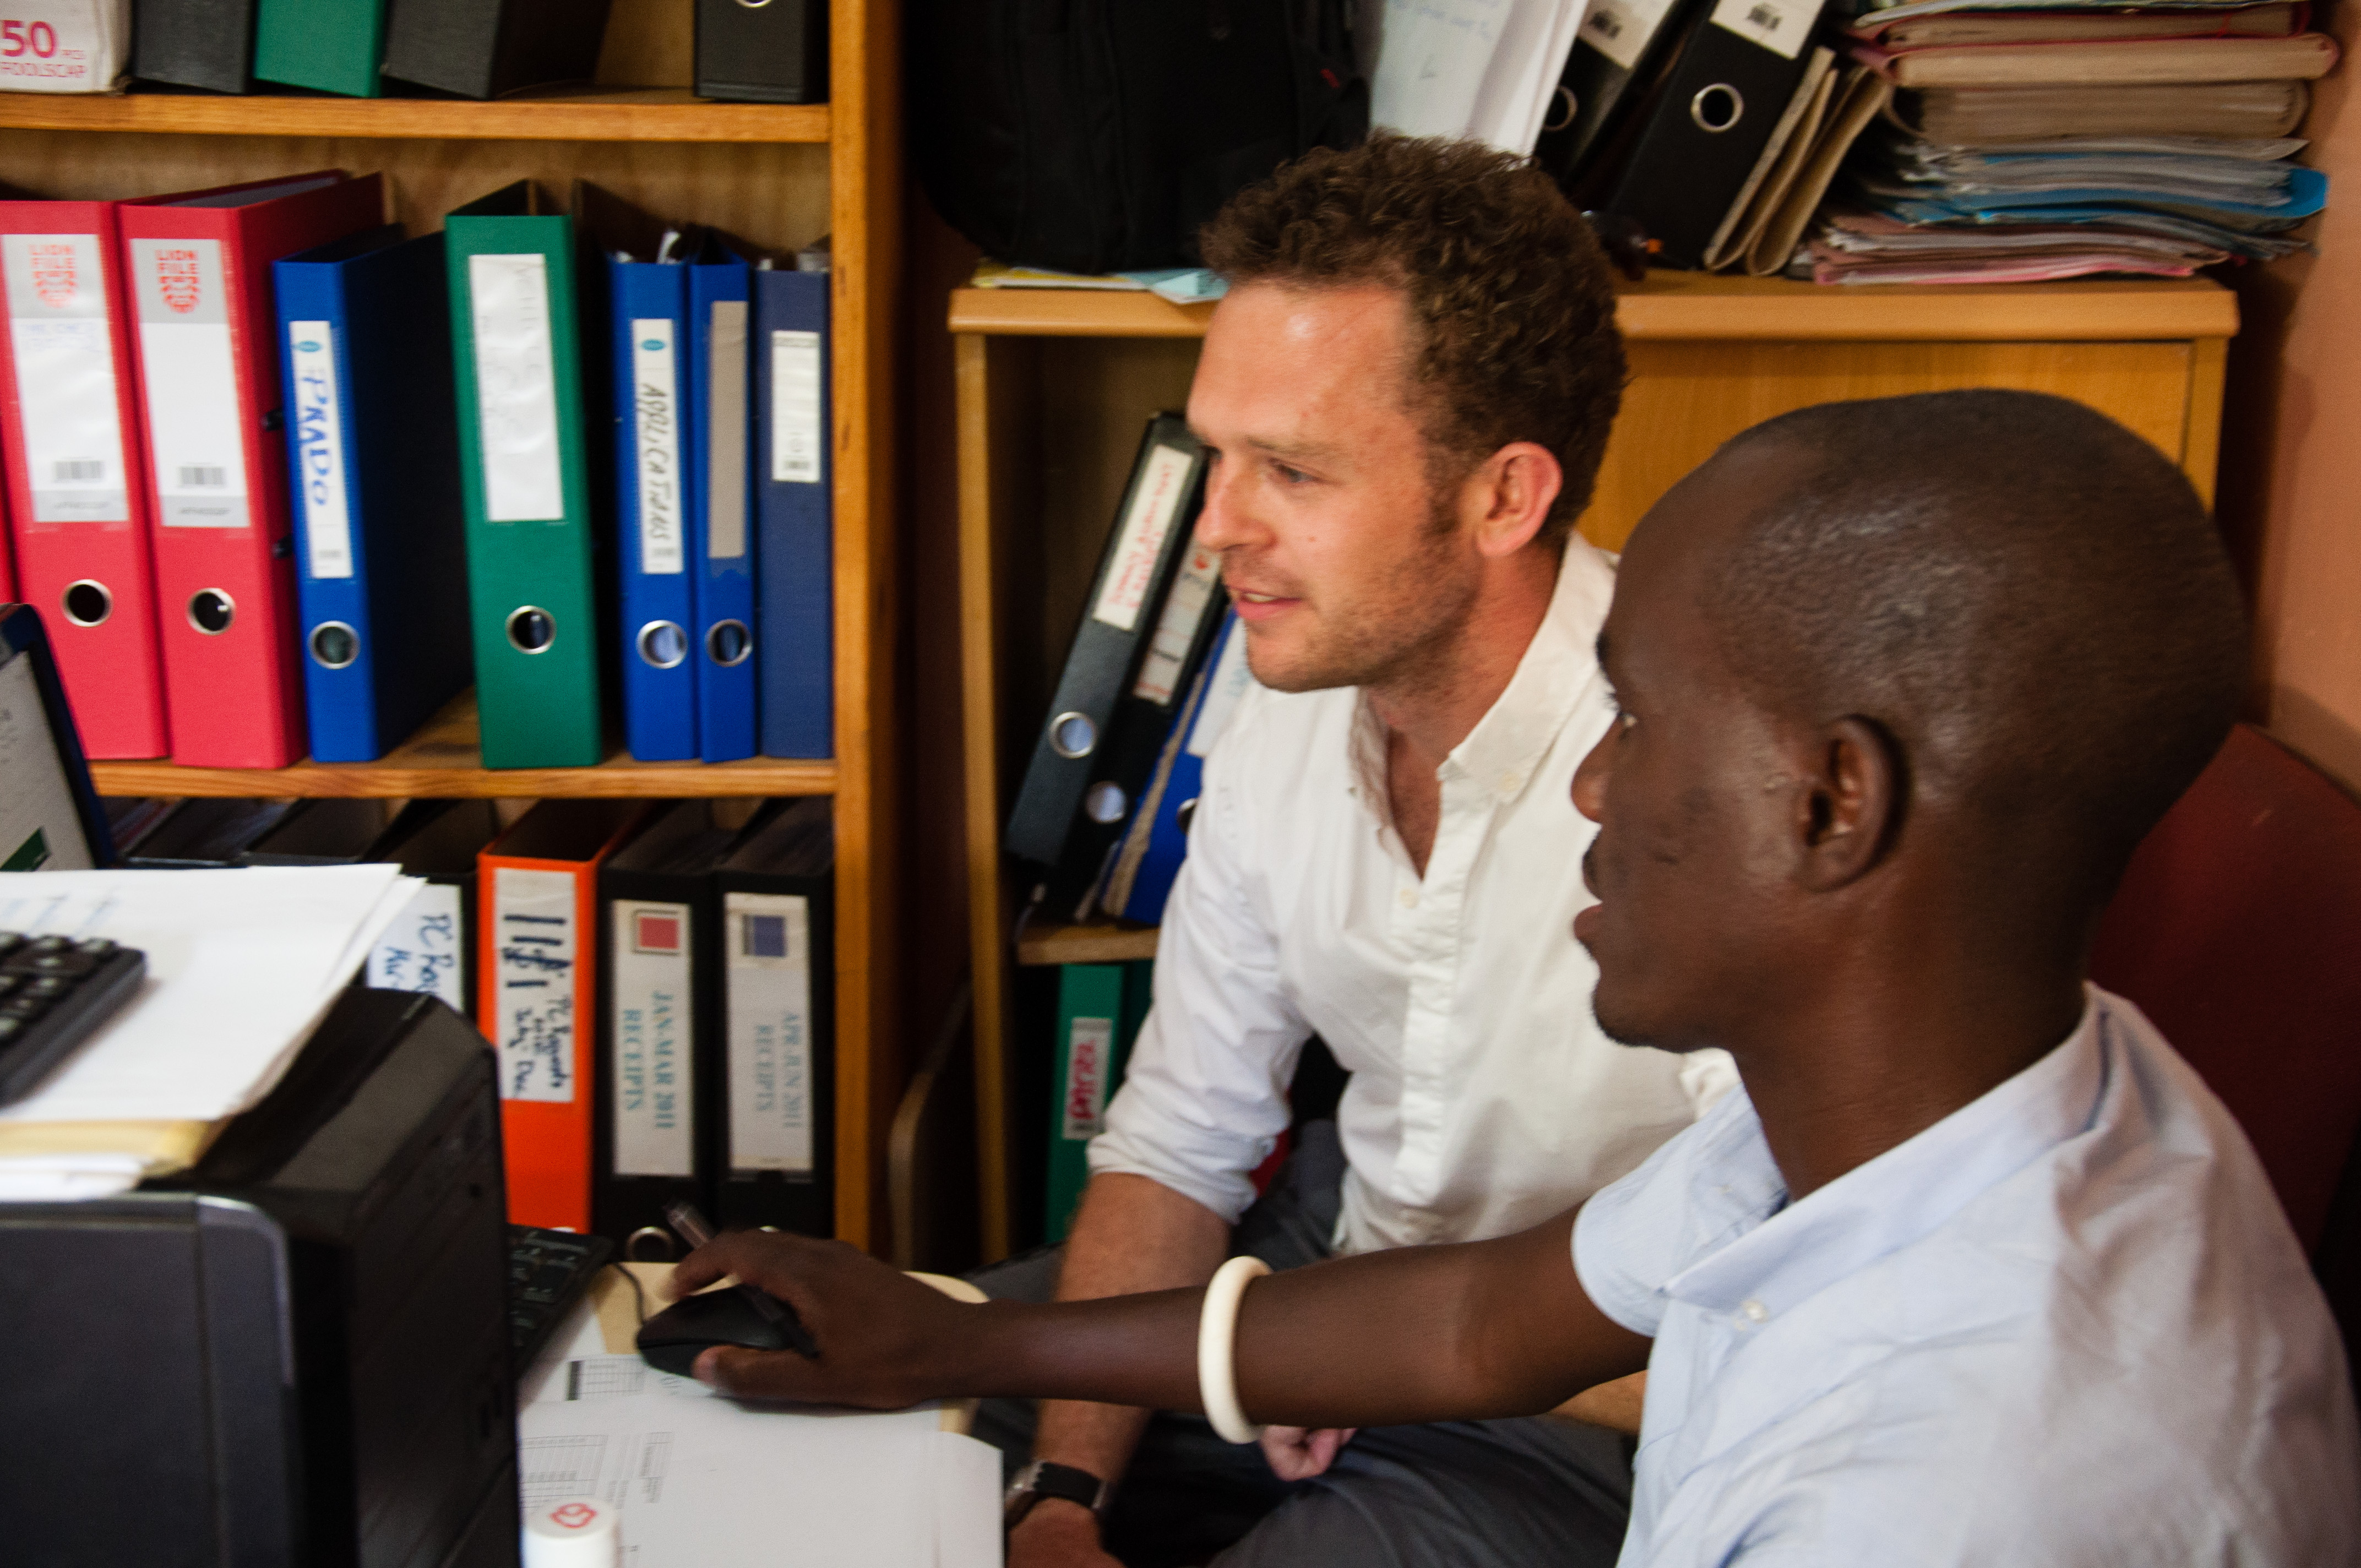 Afid volunteer shawn coaches charity partner accountant at desk